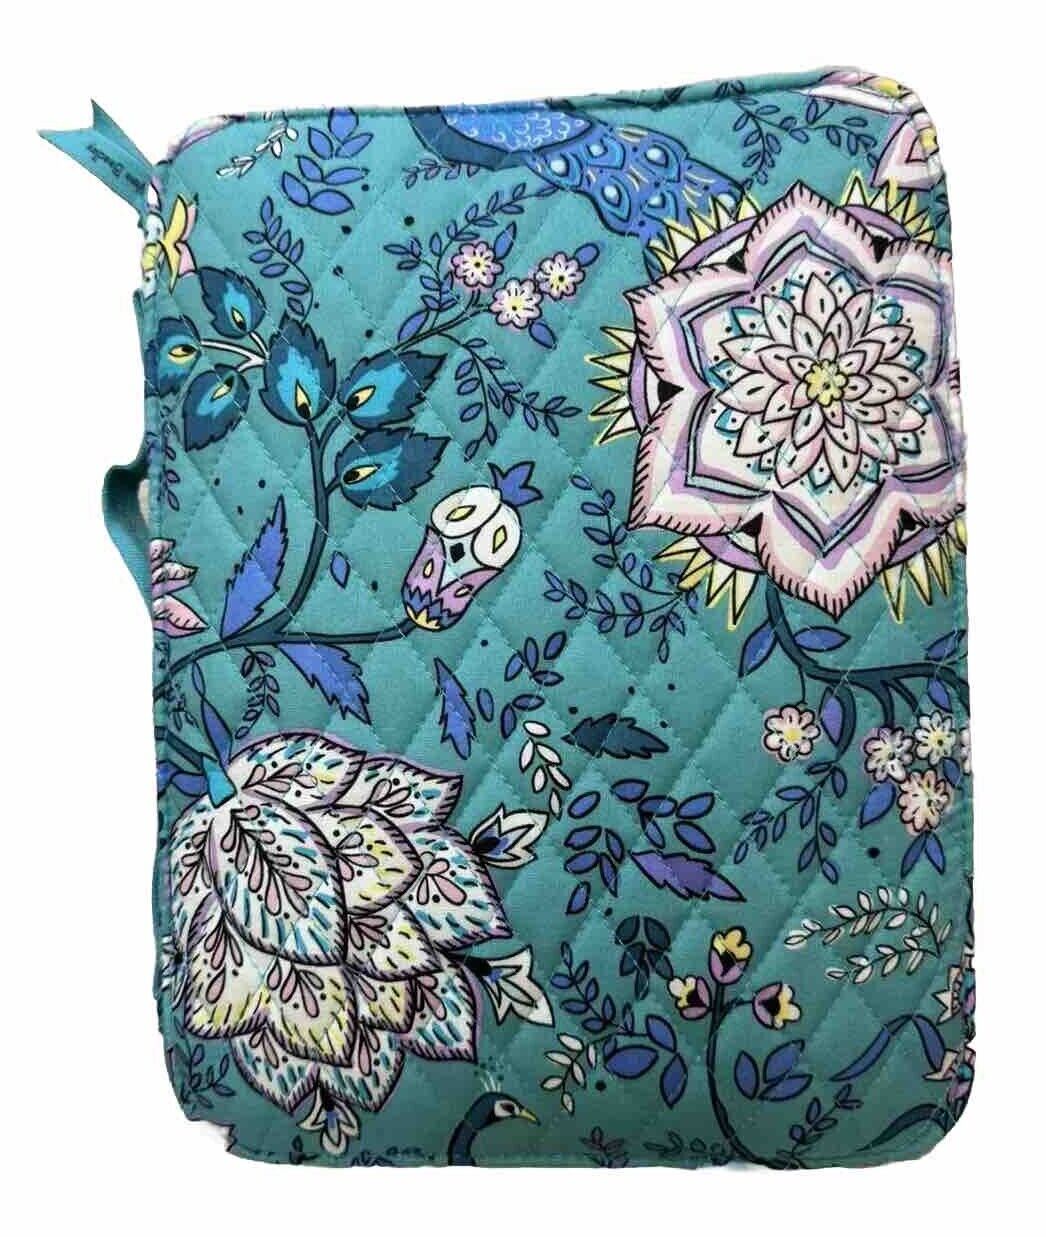 Vera Bradley Quilted Tablet Organizer Peacock Garden Turquoise Or Bible Cover